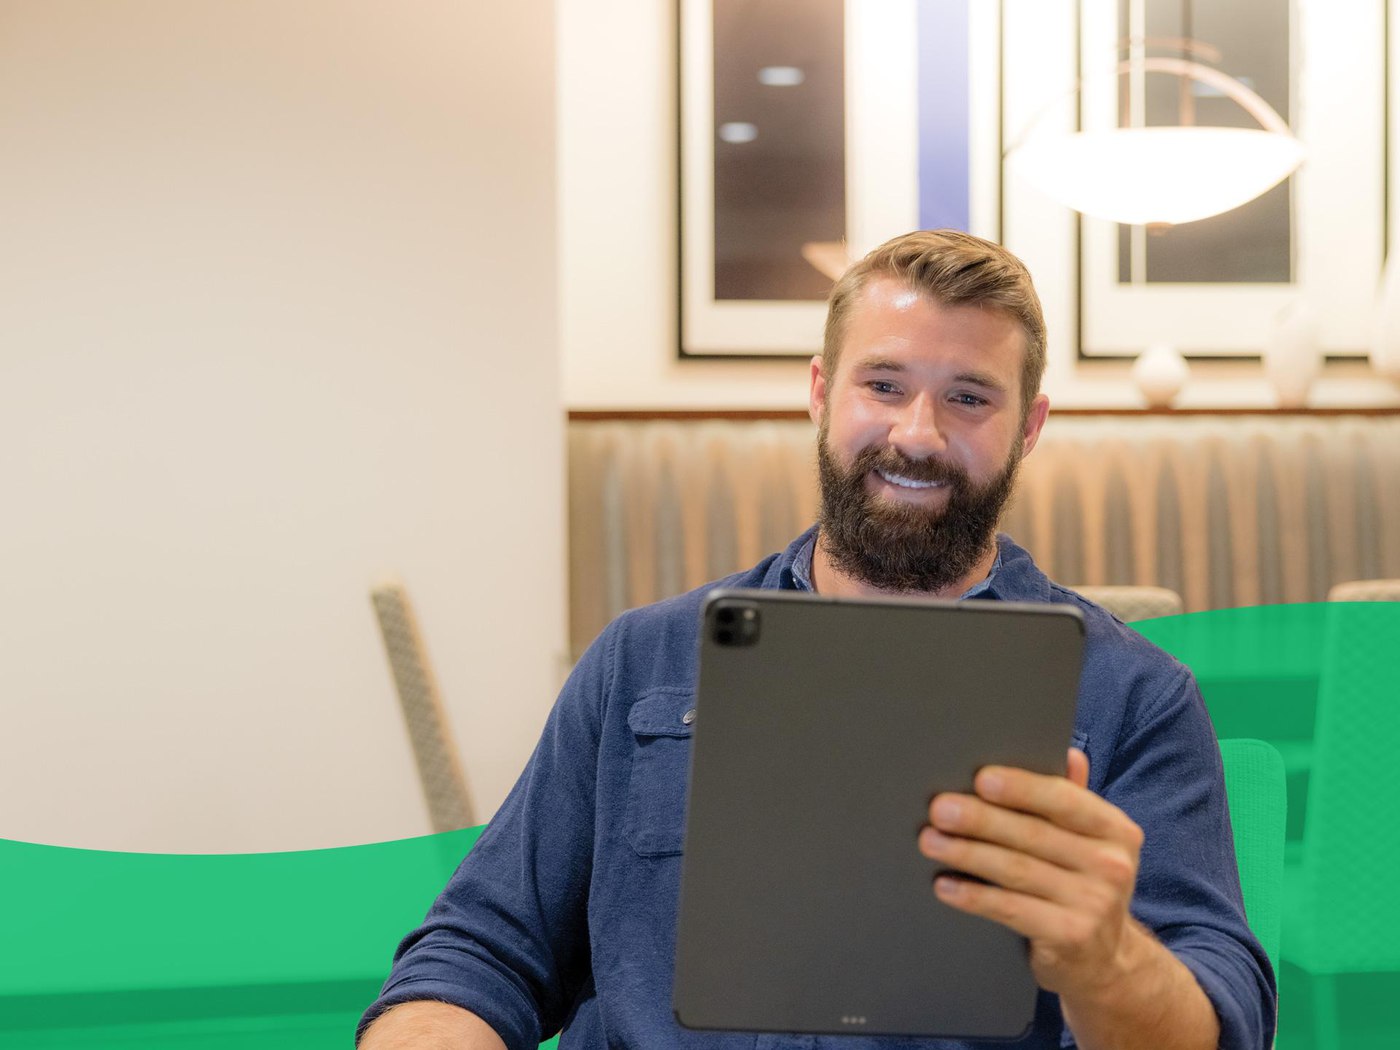 guy smiling looking at tablet